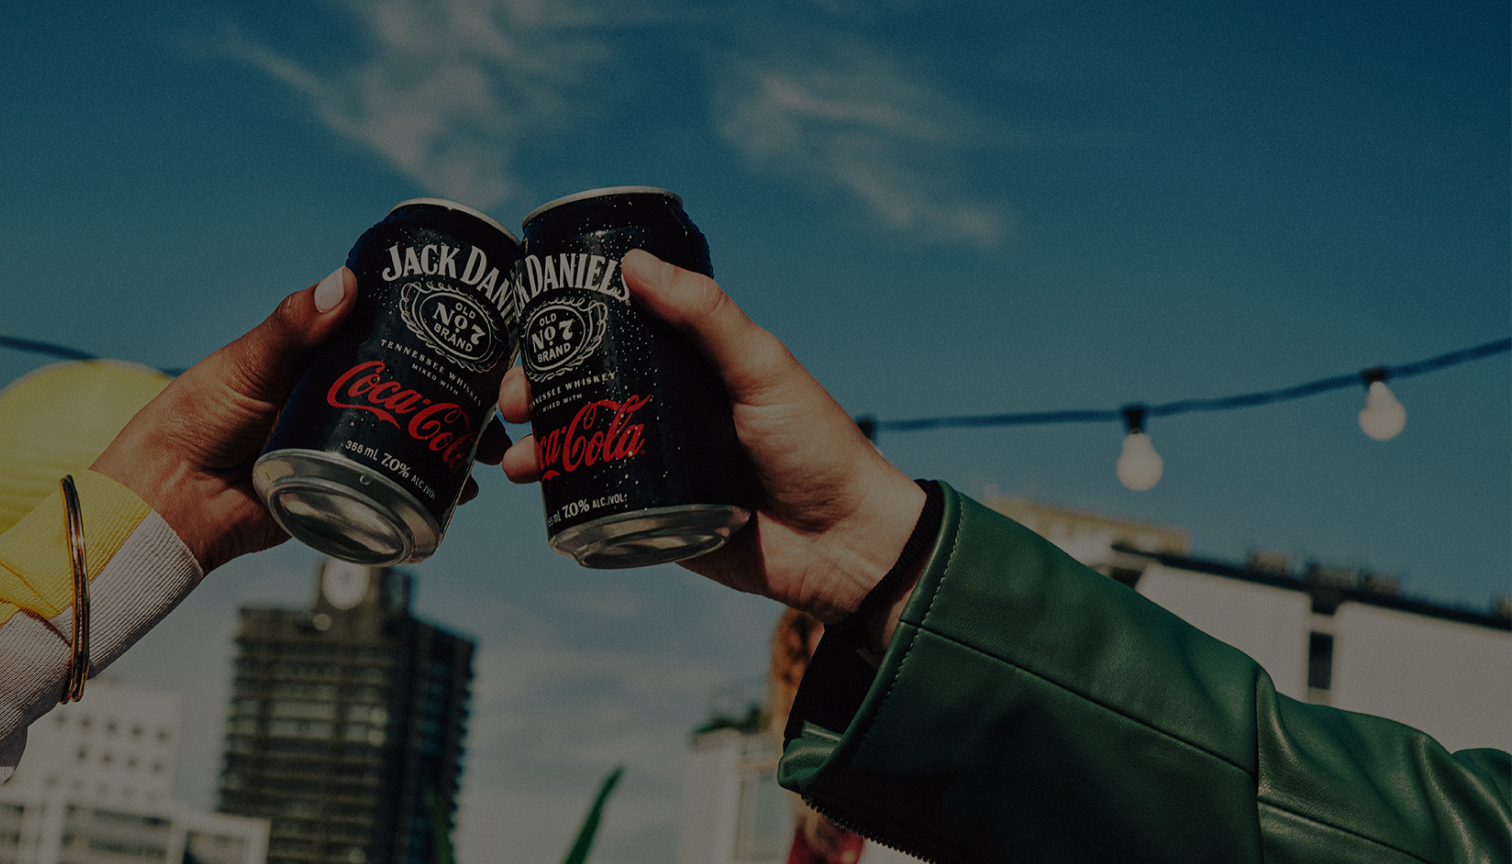 Image of an arm in a green jacket holding a Jack Daniel's and Coca-Cola can pressing up against another Jack Daniel's and Coca-Cola can held by an african-american arm in a cream and yellow sweater. Cheers!